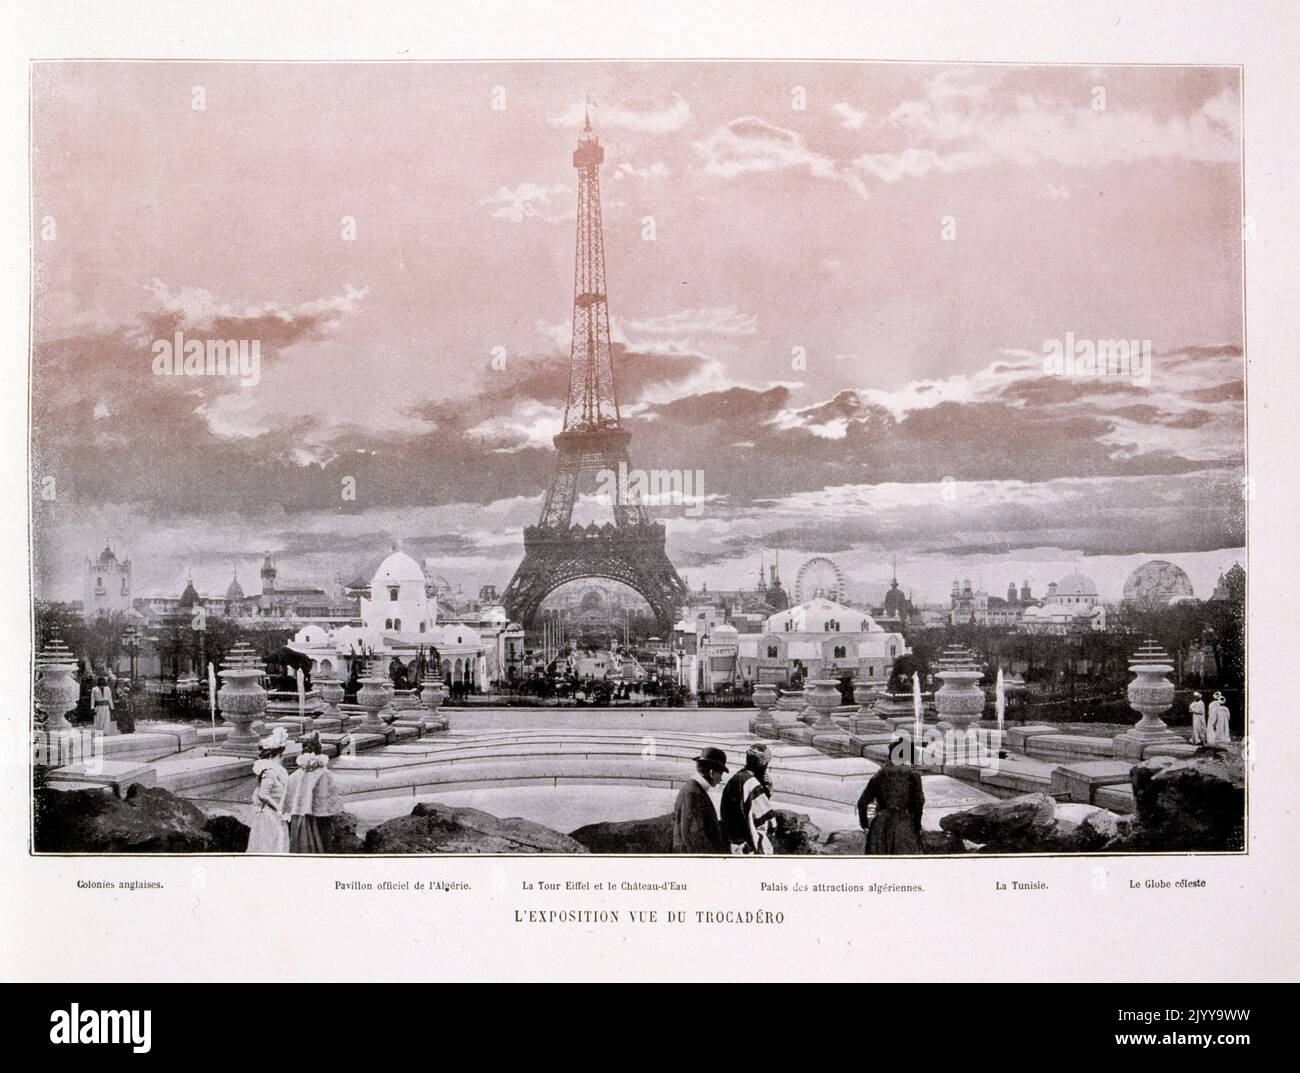 Exposition Universelle (World Fair) Paris, 1900; The Exposition Universelle of 1900, better known in English as the 1900 Paris Exposition, was a world's fair held in Paris, France, from 14 April to 12 November 1900, to celebrate the achievements of the past century and to accelerate development into the next. The style that was universally present in the Exposition was Art Nouveau. The fair, visited by nearly 50 million, displayed many technological innovations; black and white photograph of the Eiffel Tower taken from the Trocadero Stock Photo